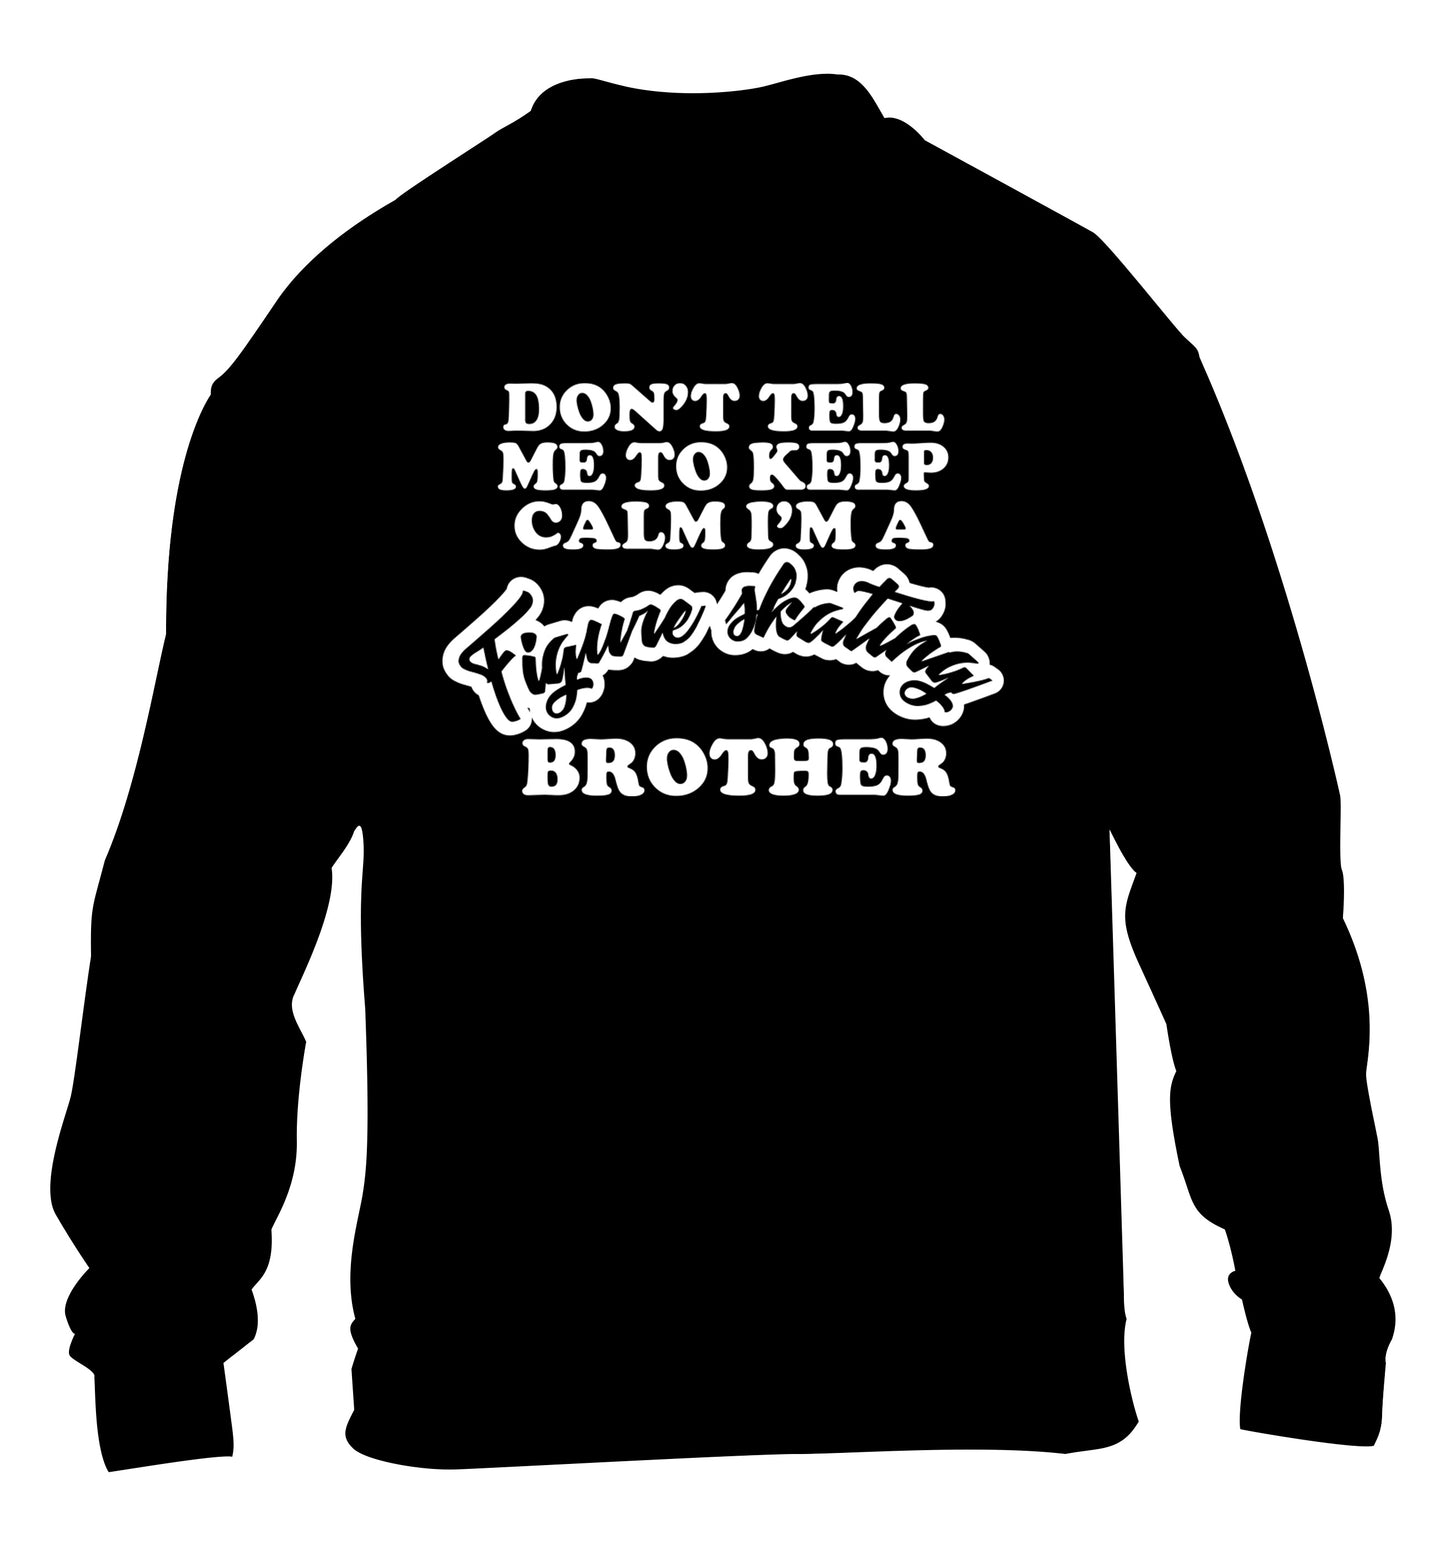 Don't tell me to keep calm I'm a figure skating brother children's black sweater 12-14 Years